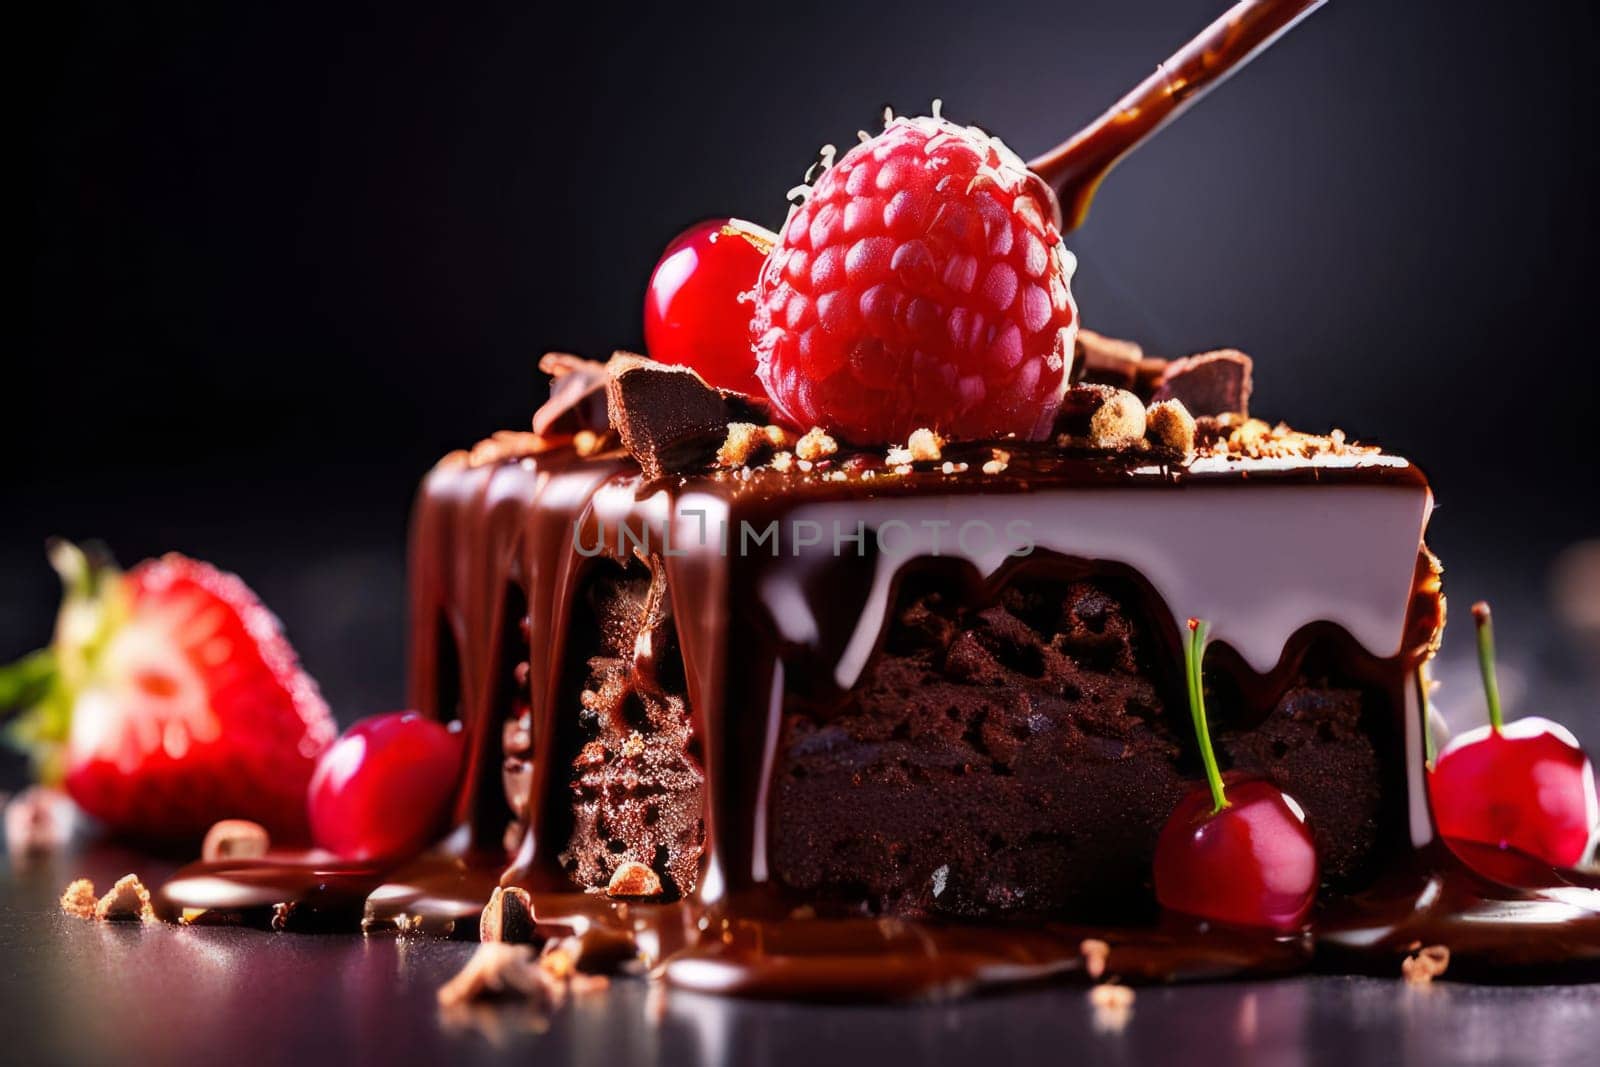 Decadent chocolate cake adorned with fresh strawberries, crunchy nuts, elegantly presented on plate. For restaurant websites, cafe, bakery menus, food blogs, magazines, food, home baking inspiration. by Angelsmoon